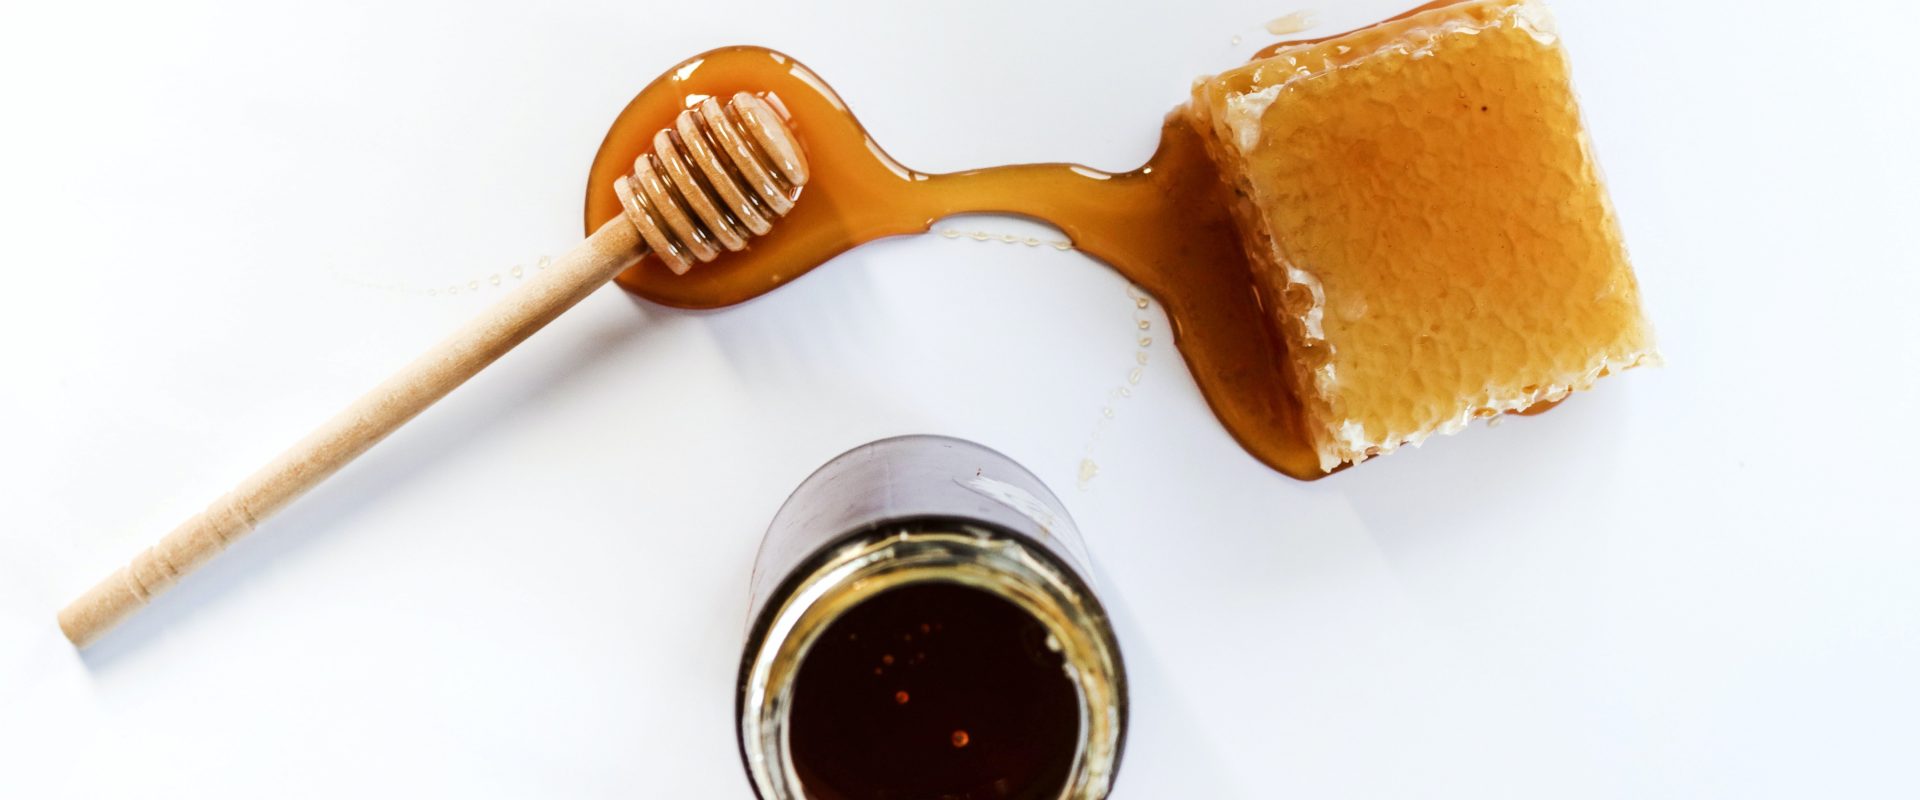 Things you probably didn't know about honey